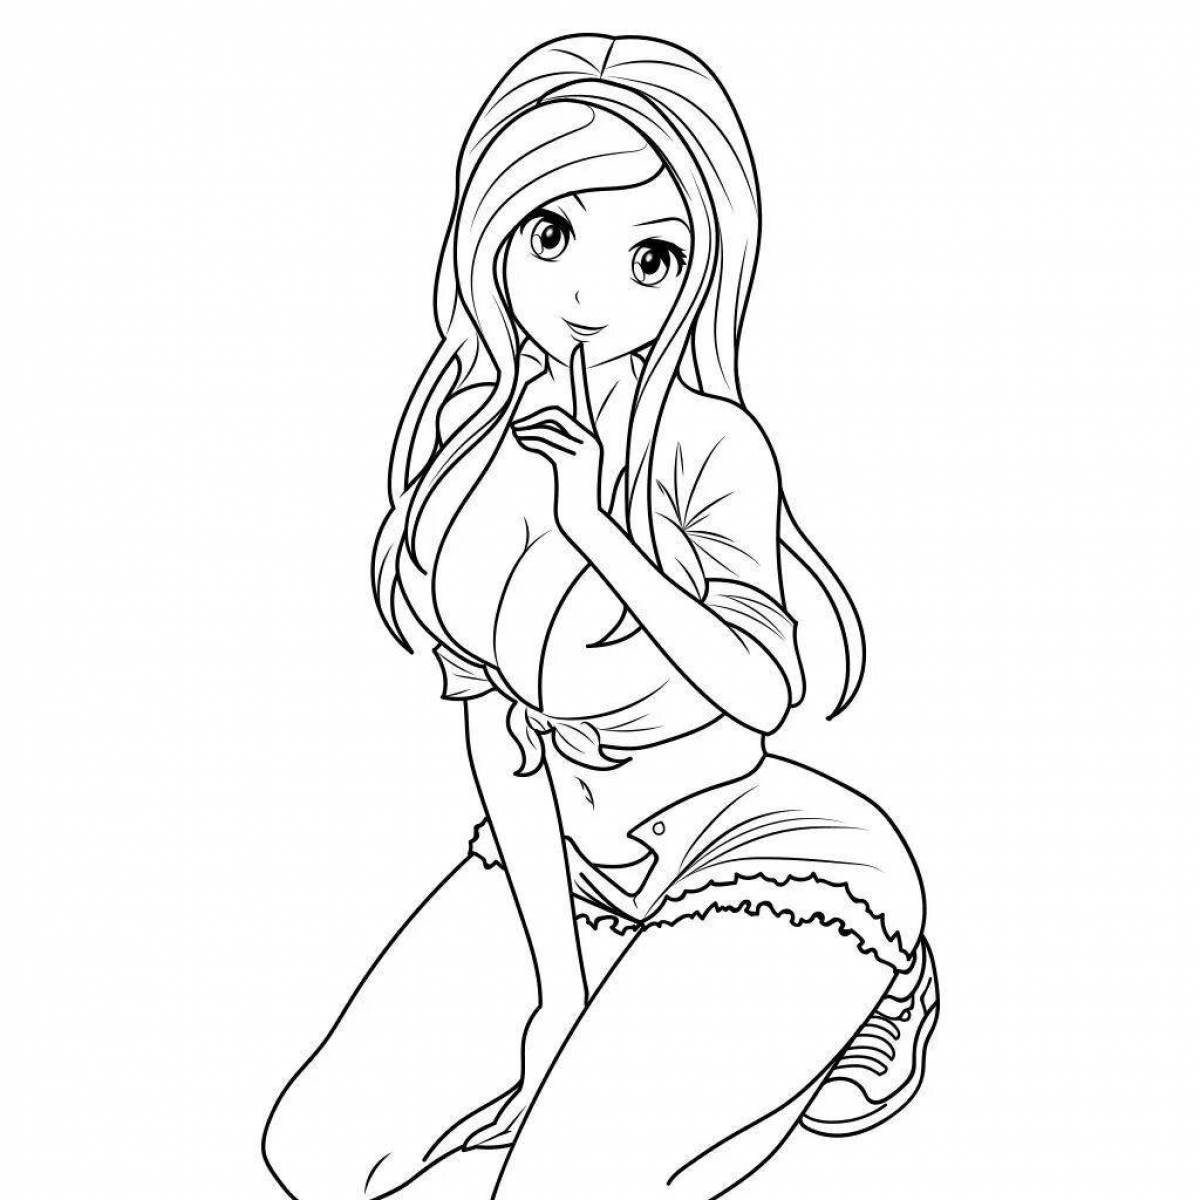 Cute coloring page 18 for girls